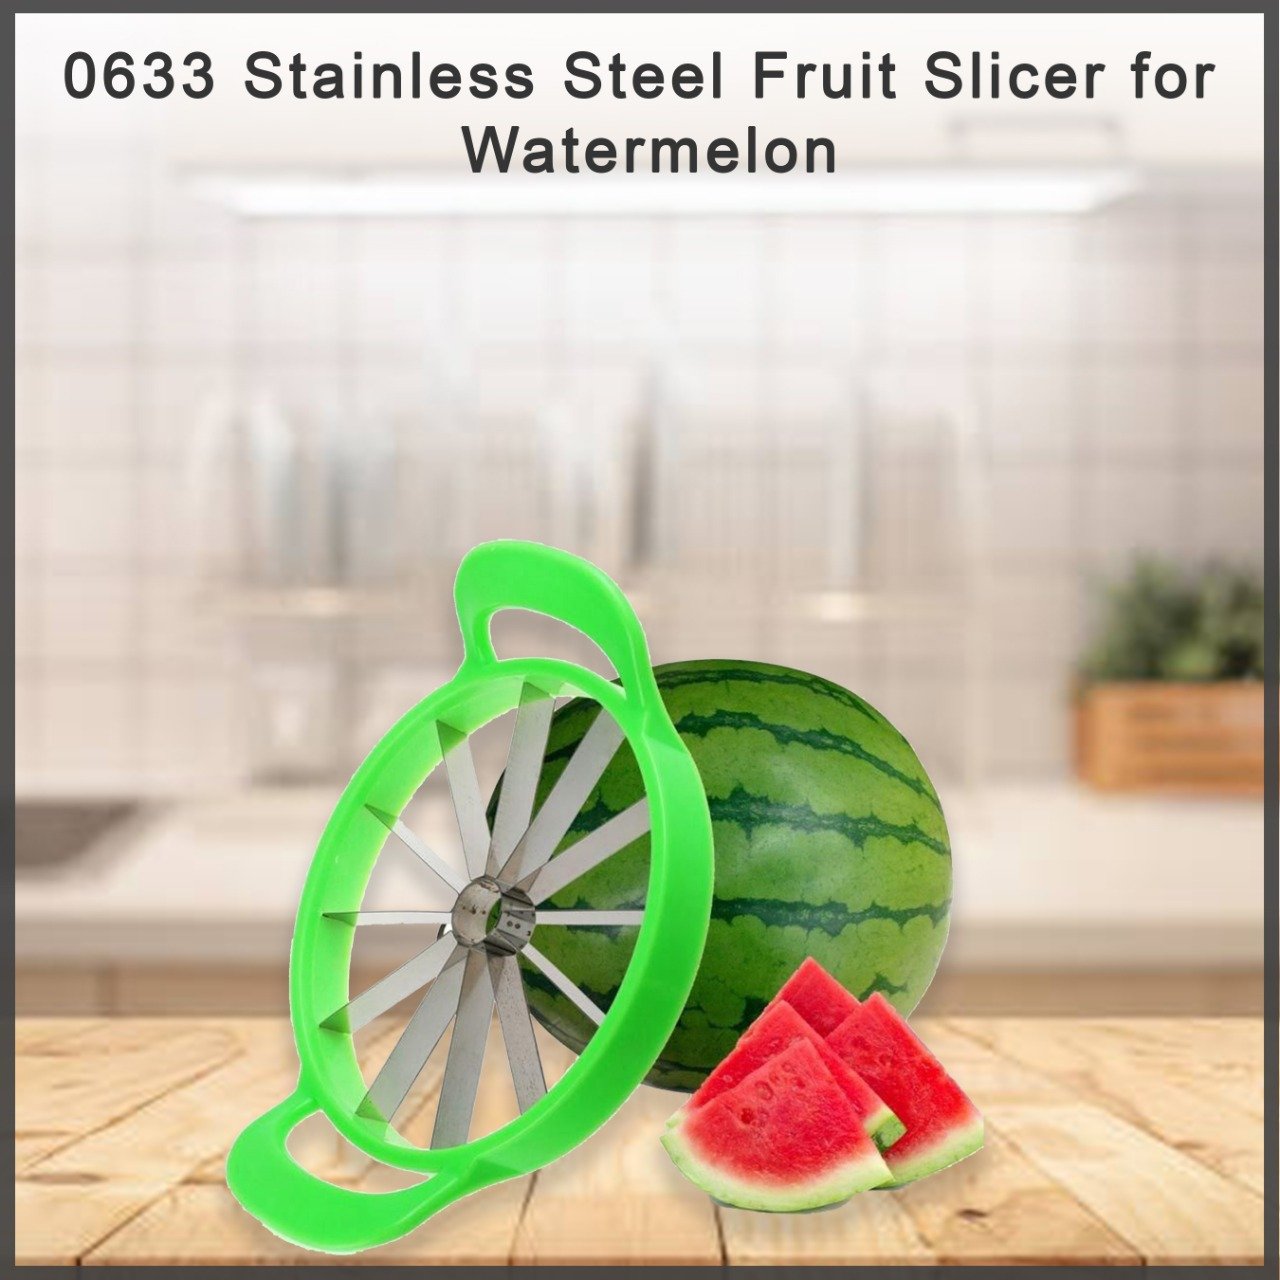 0633 Stainless Steel Fruit Slicer for Watermelon - SkyShopy